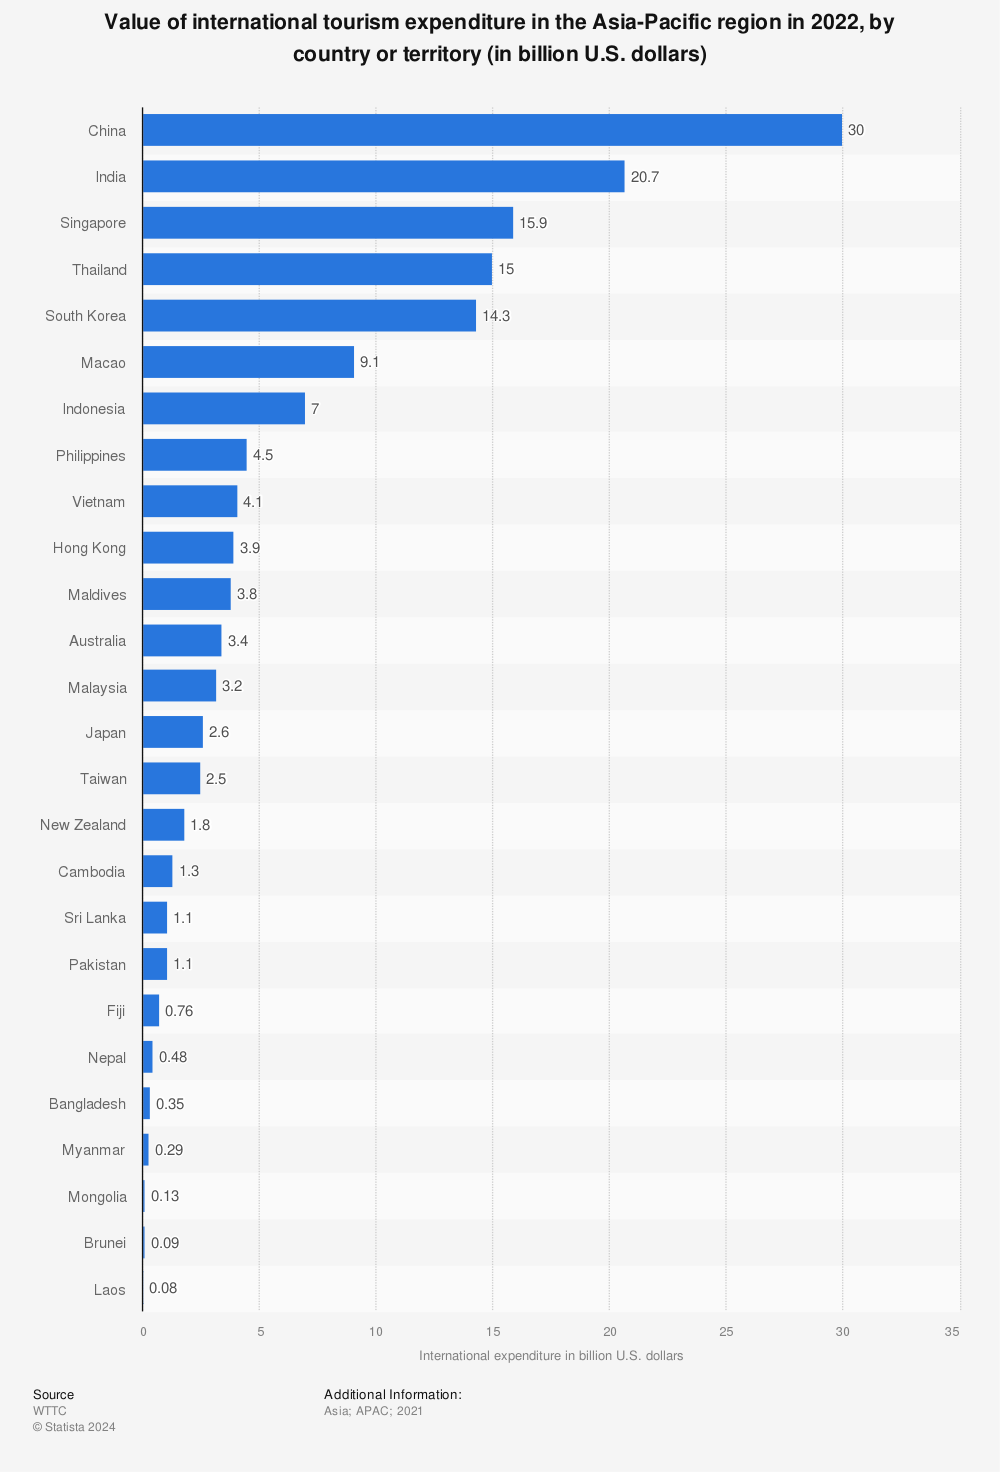 Statistic: Value of international tourism expenditure in the Asia-Pacific region in 2020, by country (in billion U.S. dollars) | Statista